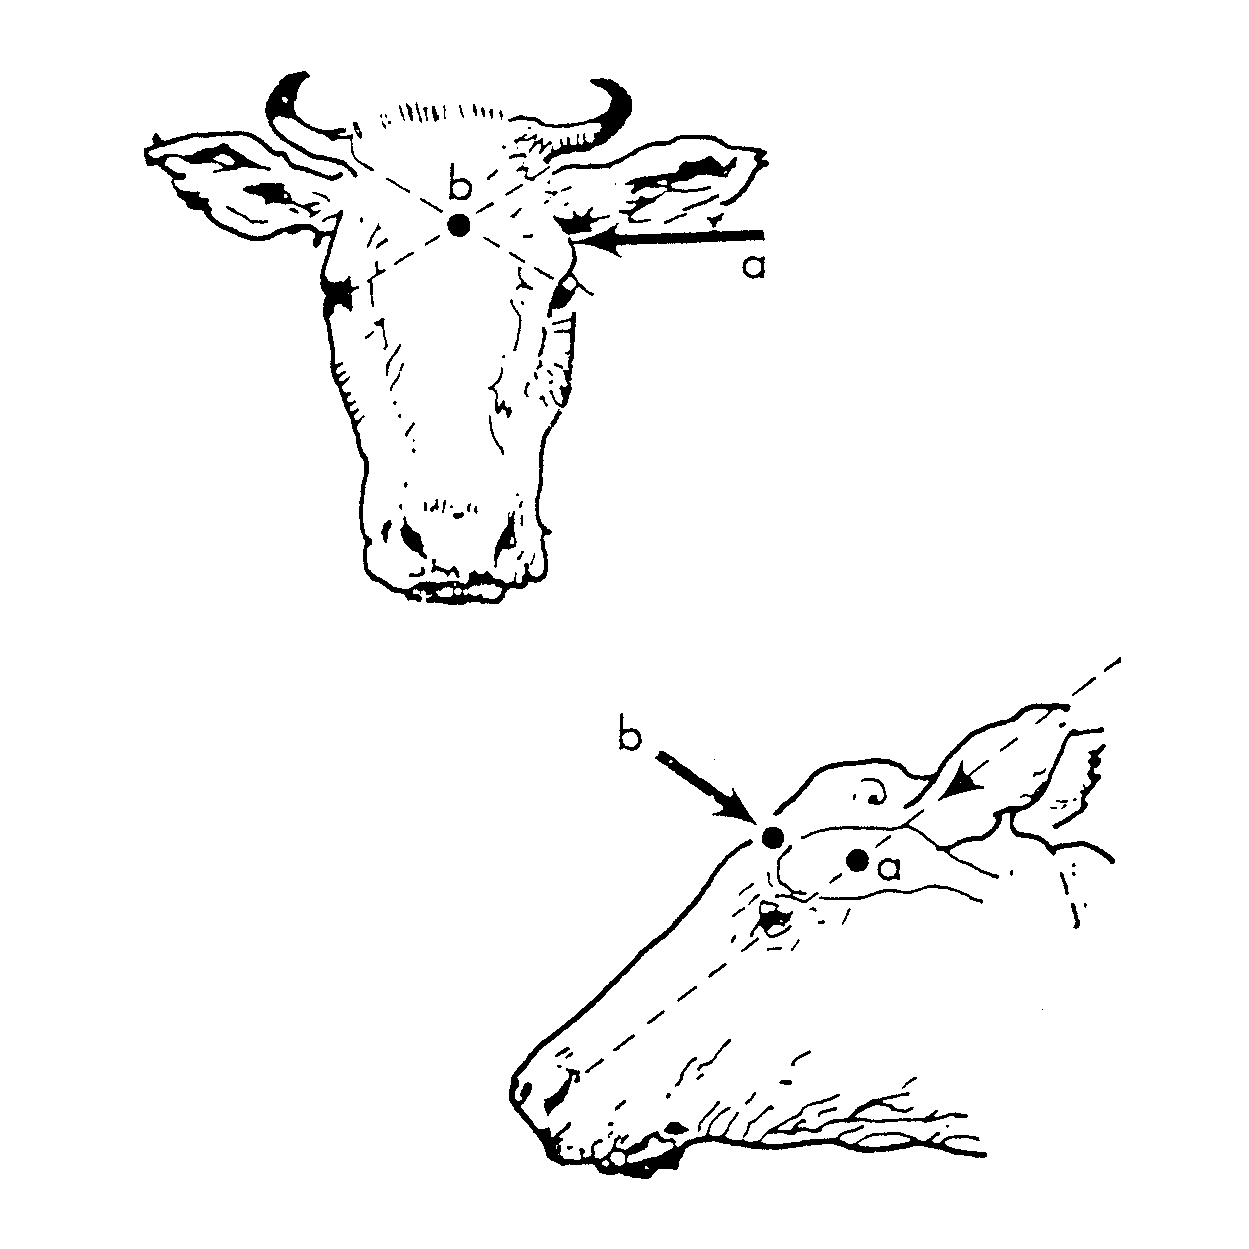 Diagram of head of cattle showing the correct angles for the frontal method and temporal method of humane destruction